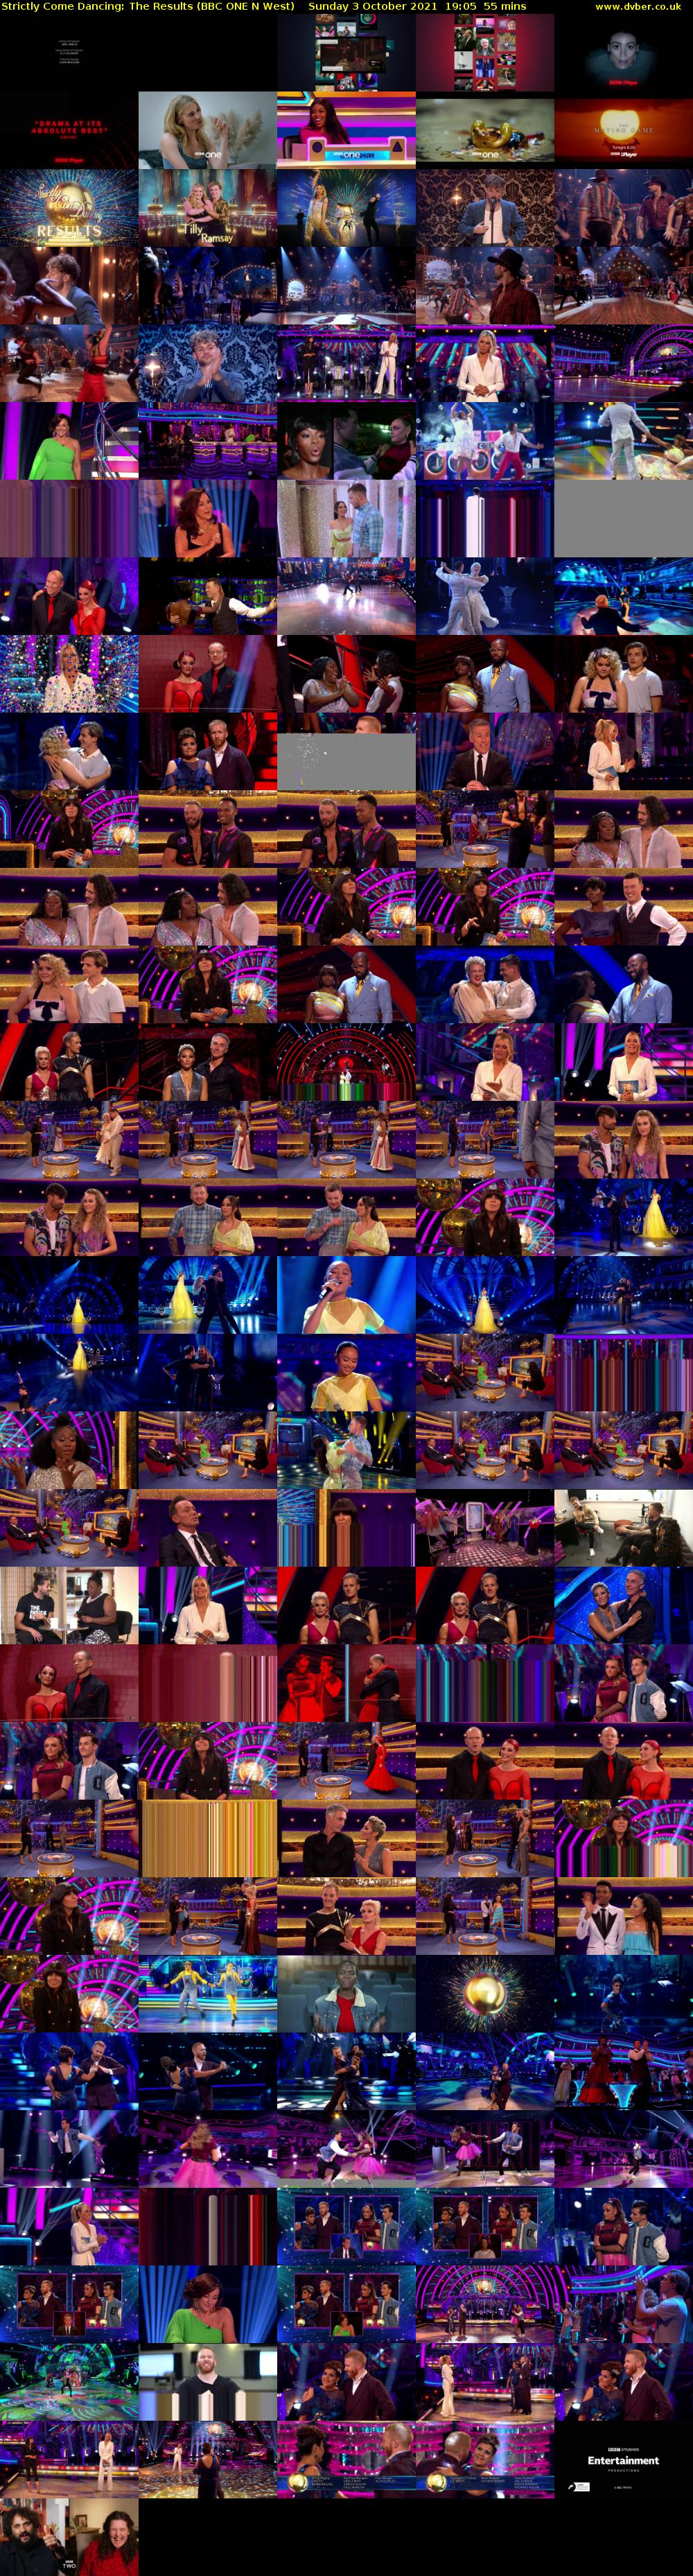 Strictly Come Dancing: The Results (BBC ONE N West) Sunday 3 October 2021 19:05 - 20:00